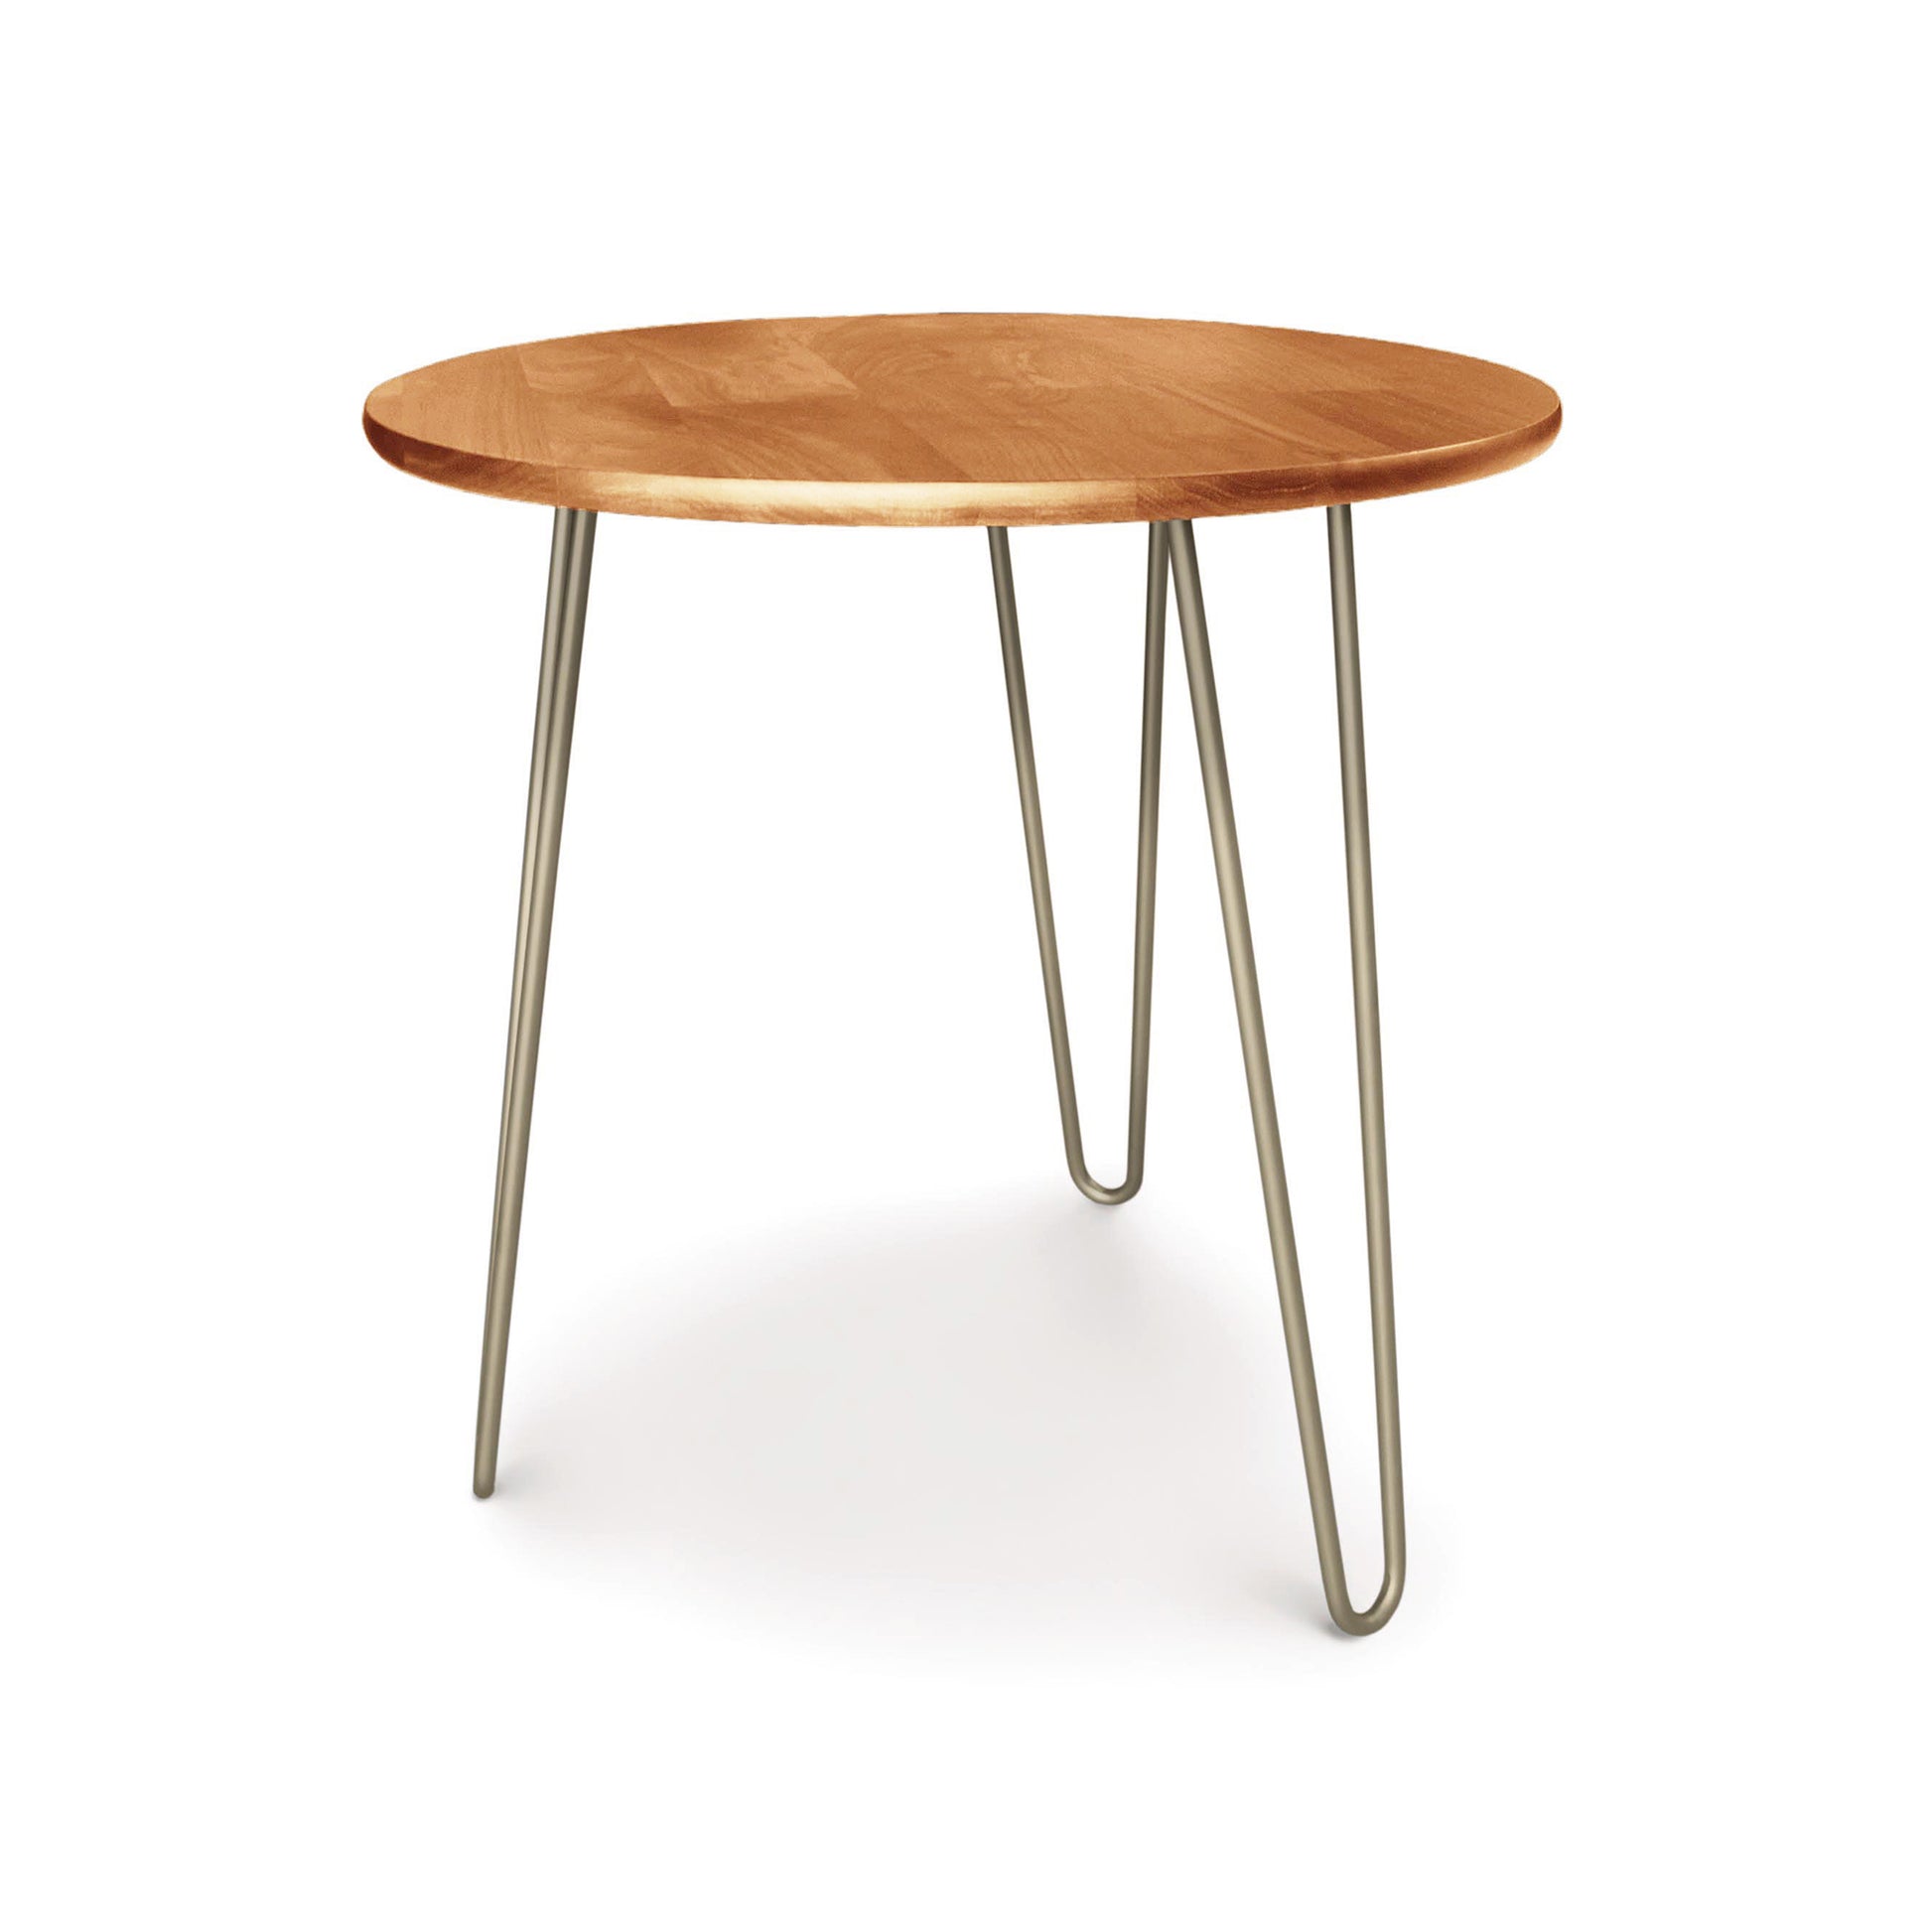 A modern Essentials Round End Table from Copeland Furniture with three metal hairpin legs, embodying mid-century modern design, on a white background.